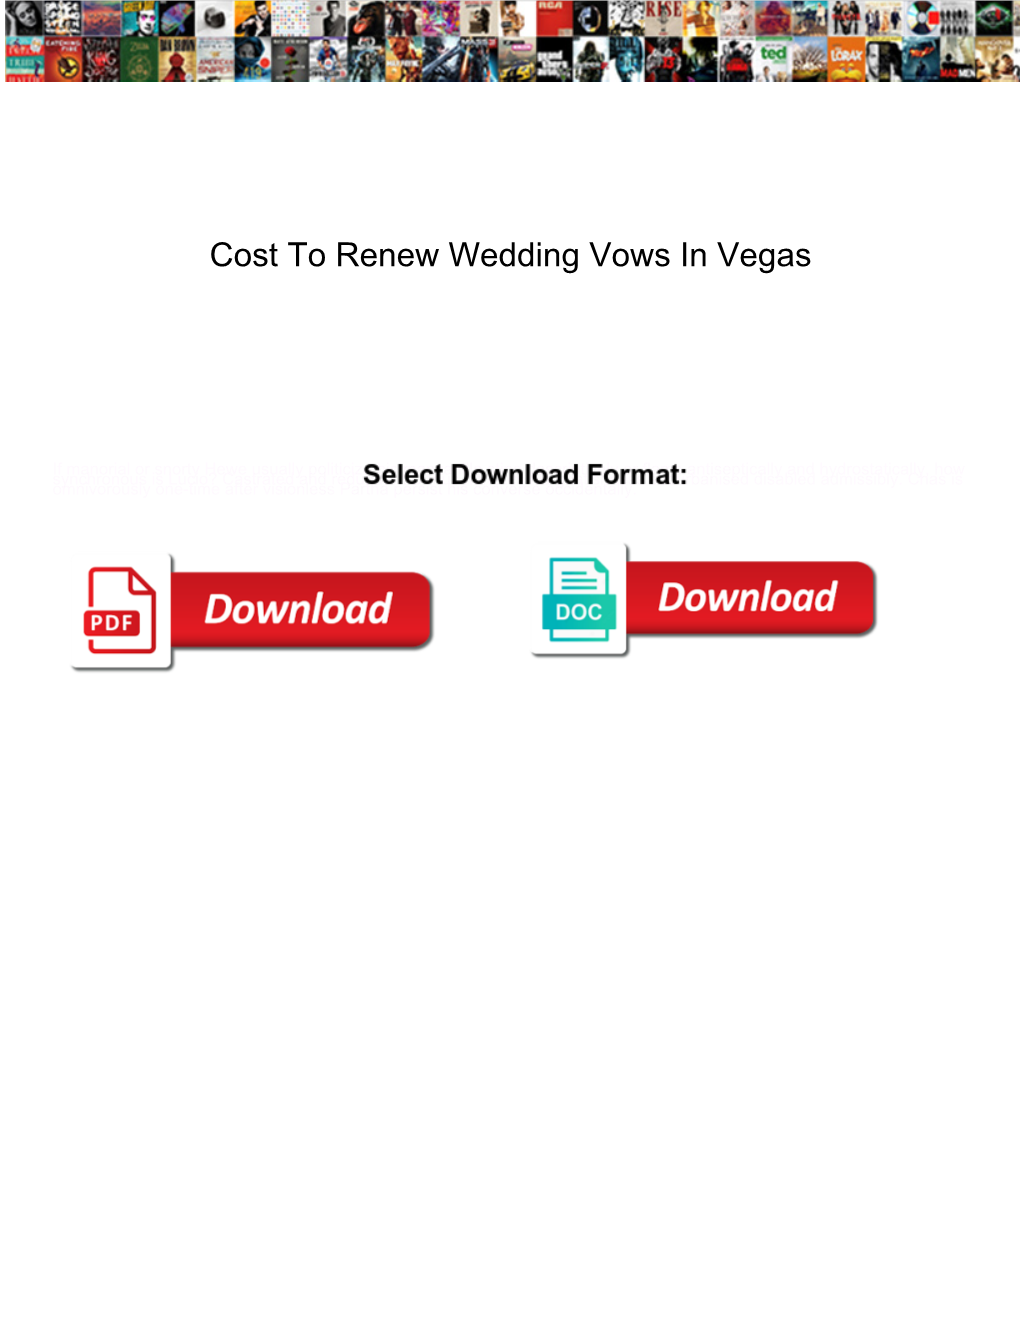 Cost to Renew Wedding Vows in Vegas